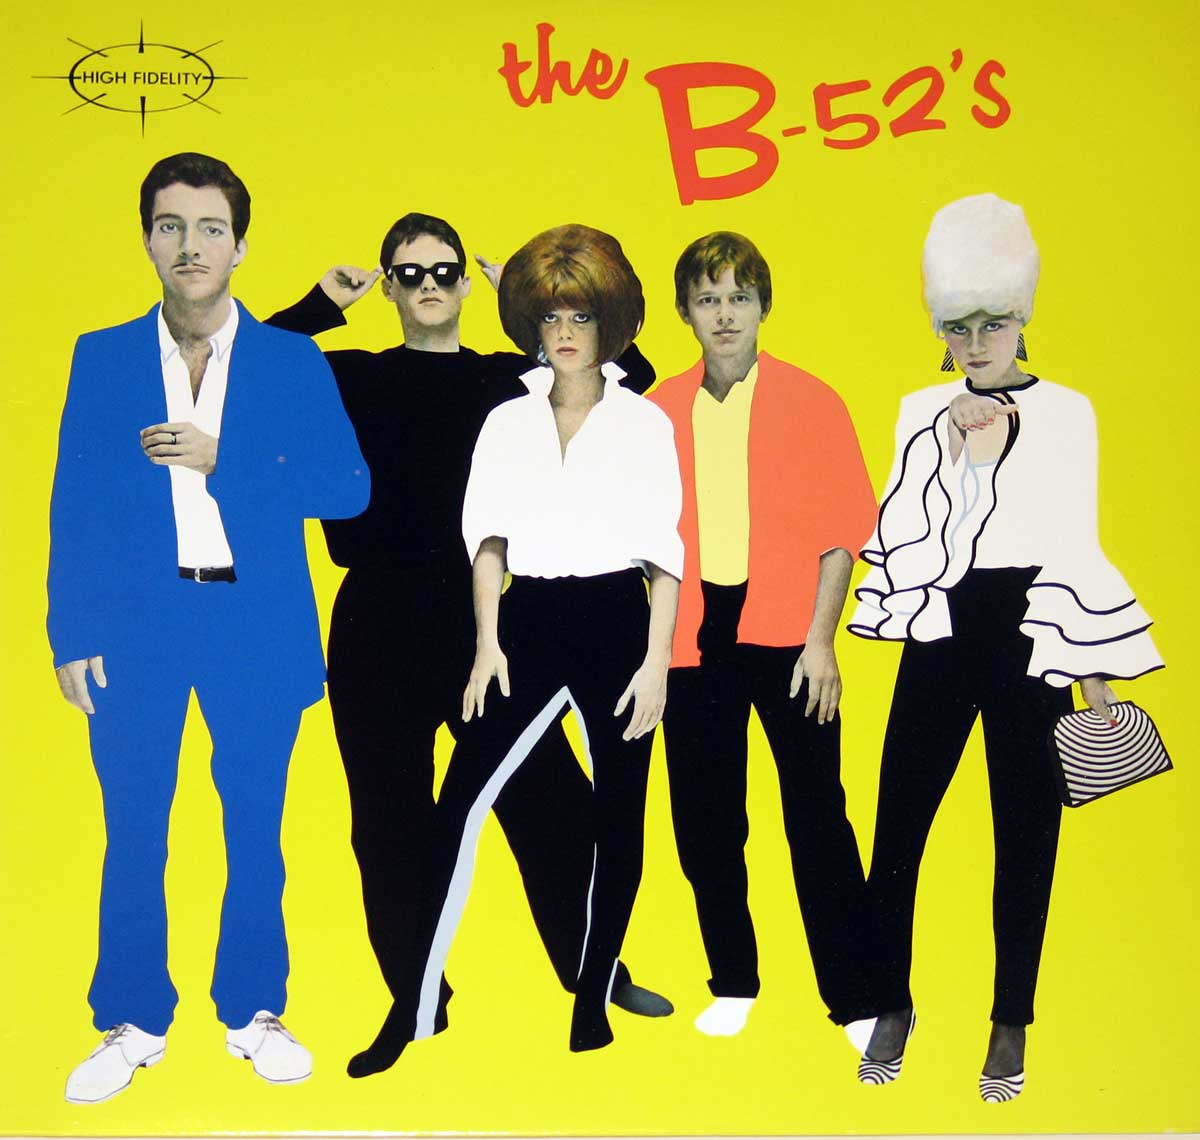 large album front cover photo of: THE B-52's  